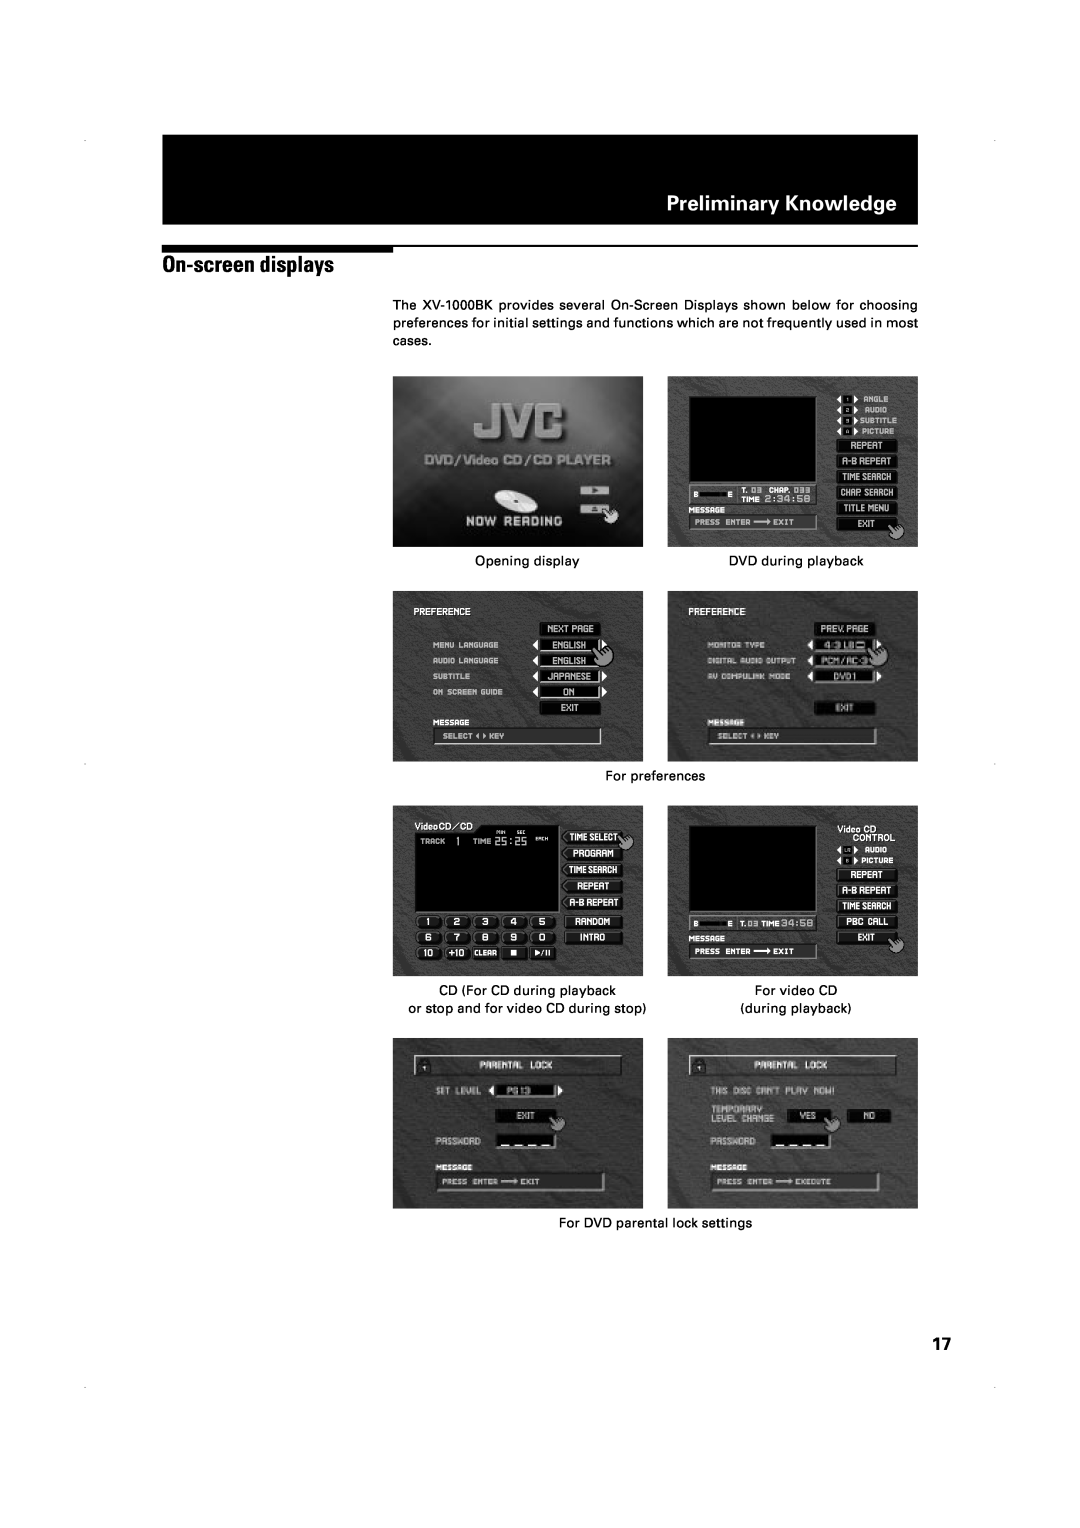 JVC XV-1000BK manual On-screendisplays, Preliminary Knowledge, Opening display, DVD during playback, For preferences 